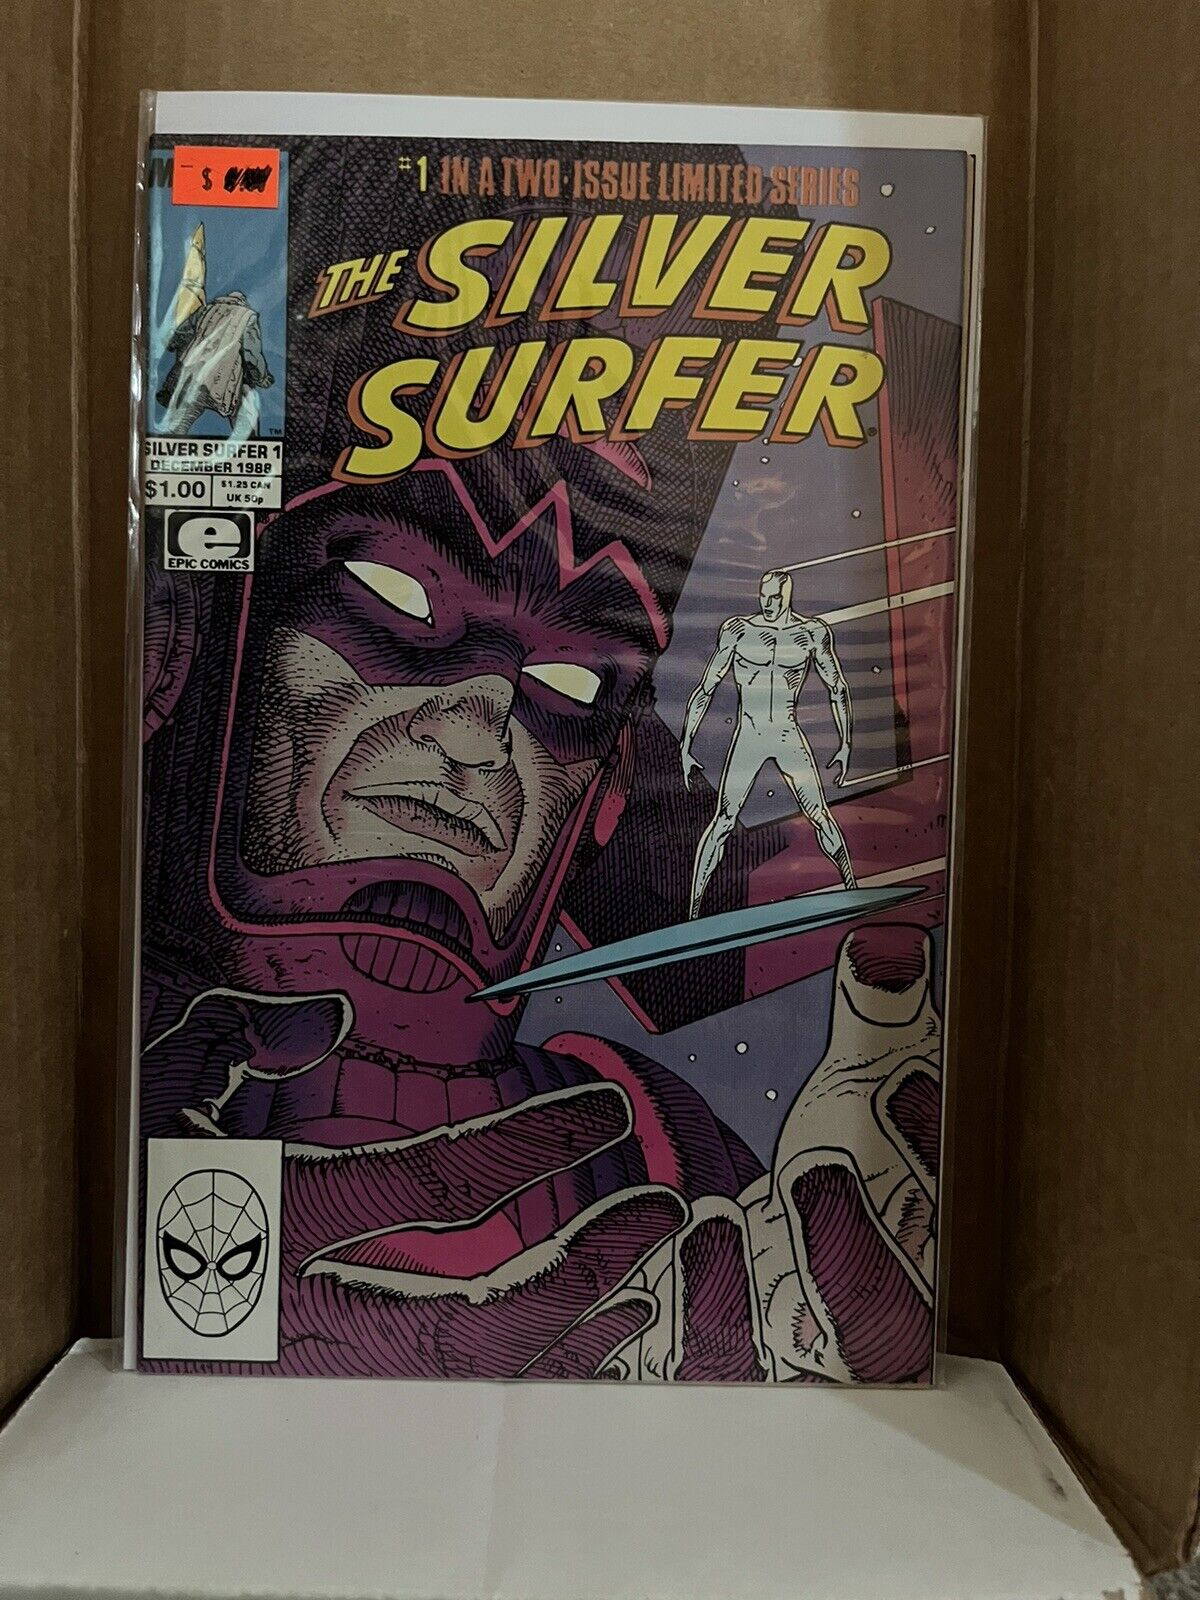 The Silver Surfer #1 (1988) Marvel Limited Series